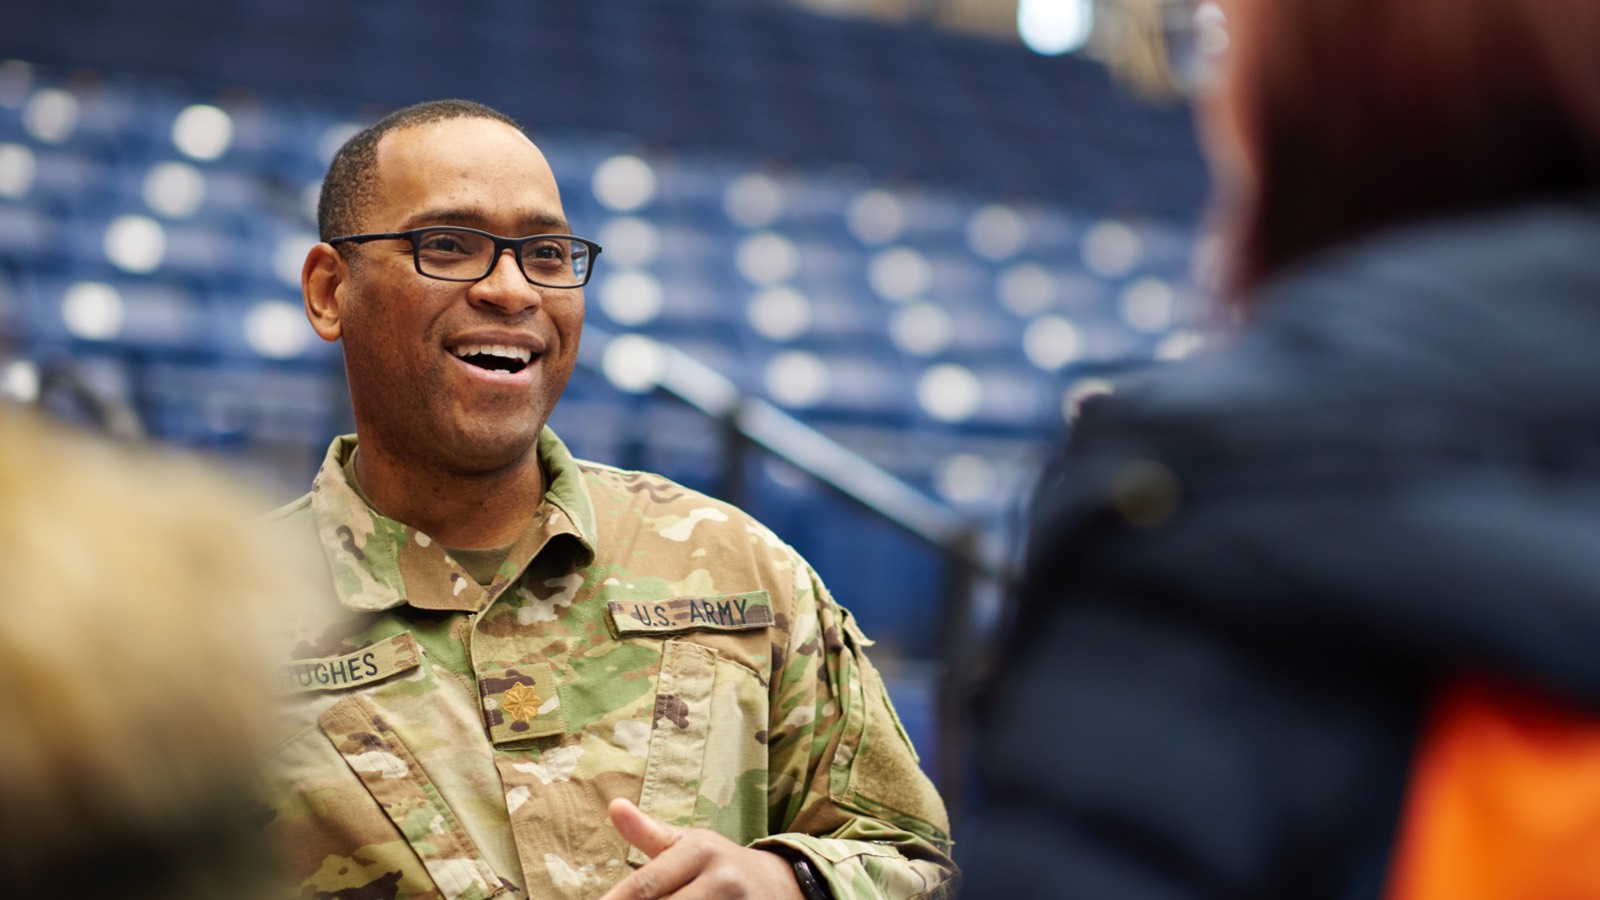 A man wearing a military uniform is smiling and interacting with people who are only partially visible within the photo.